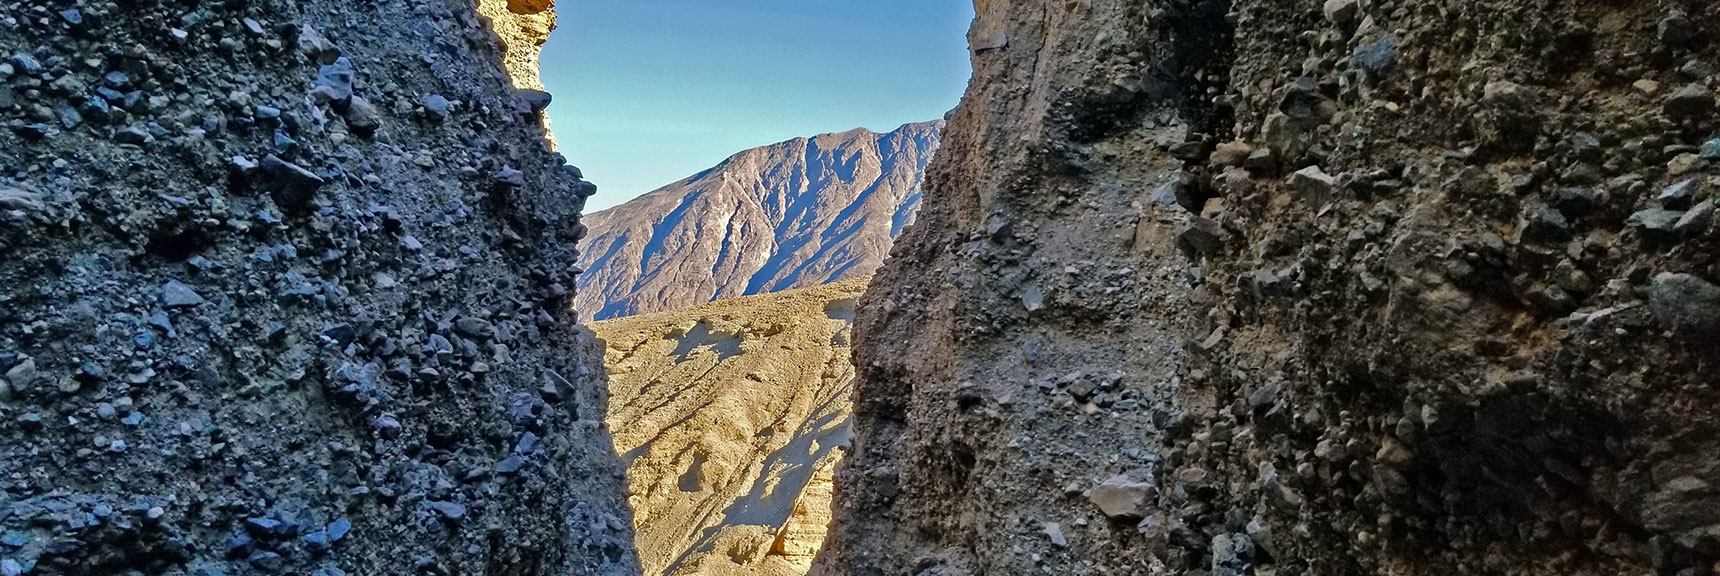 View Out Slot into Main Canyon | Sidewinder Canyon | Death Valley National Park, California